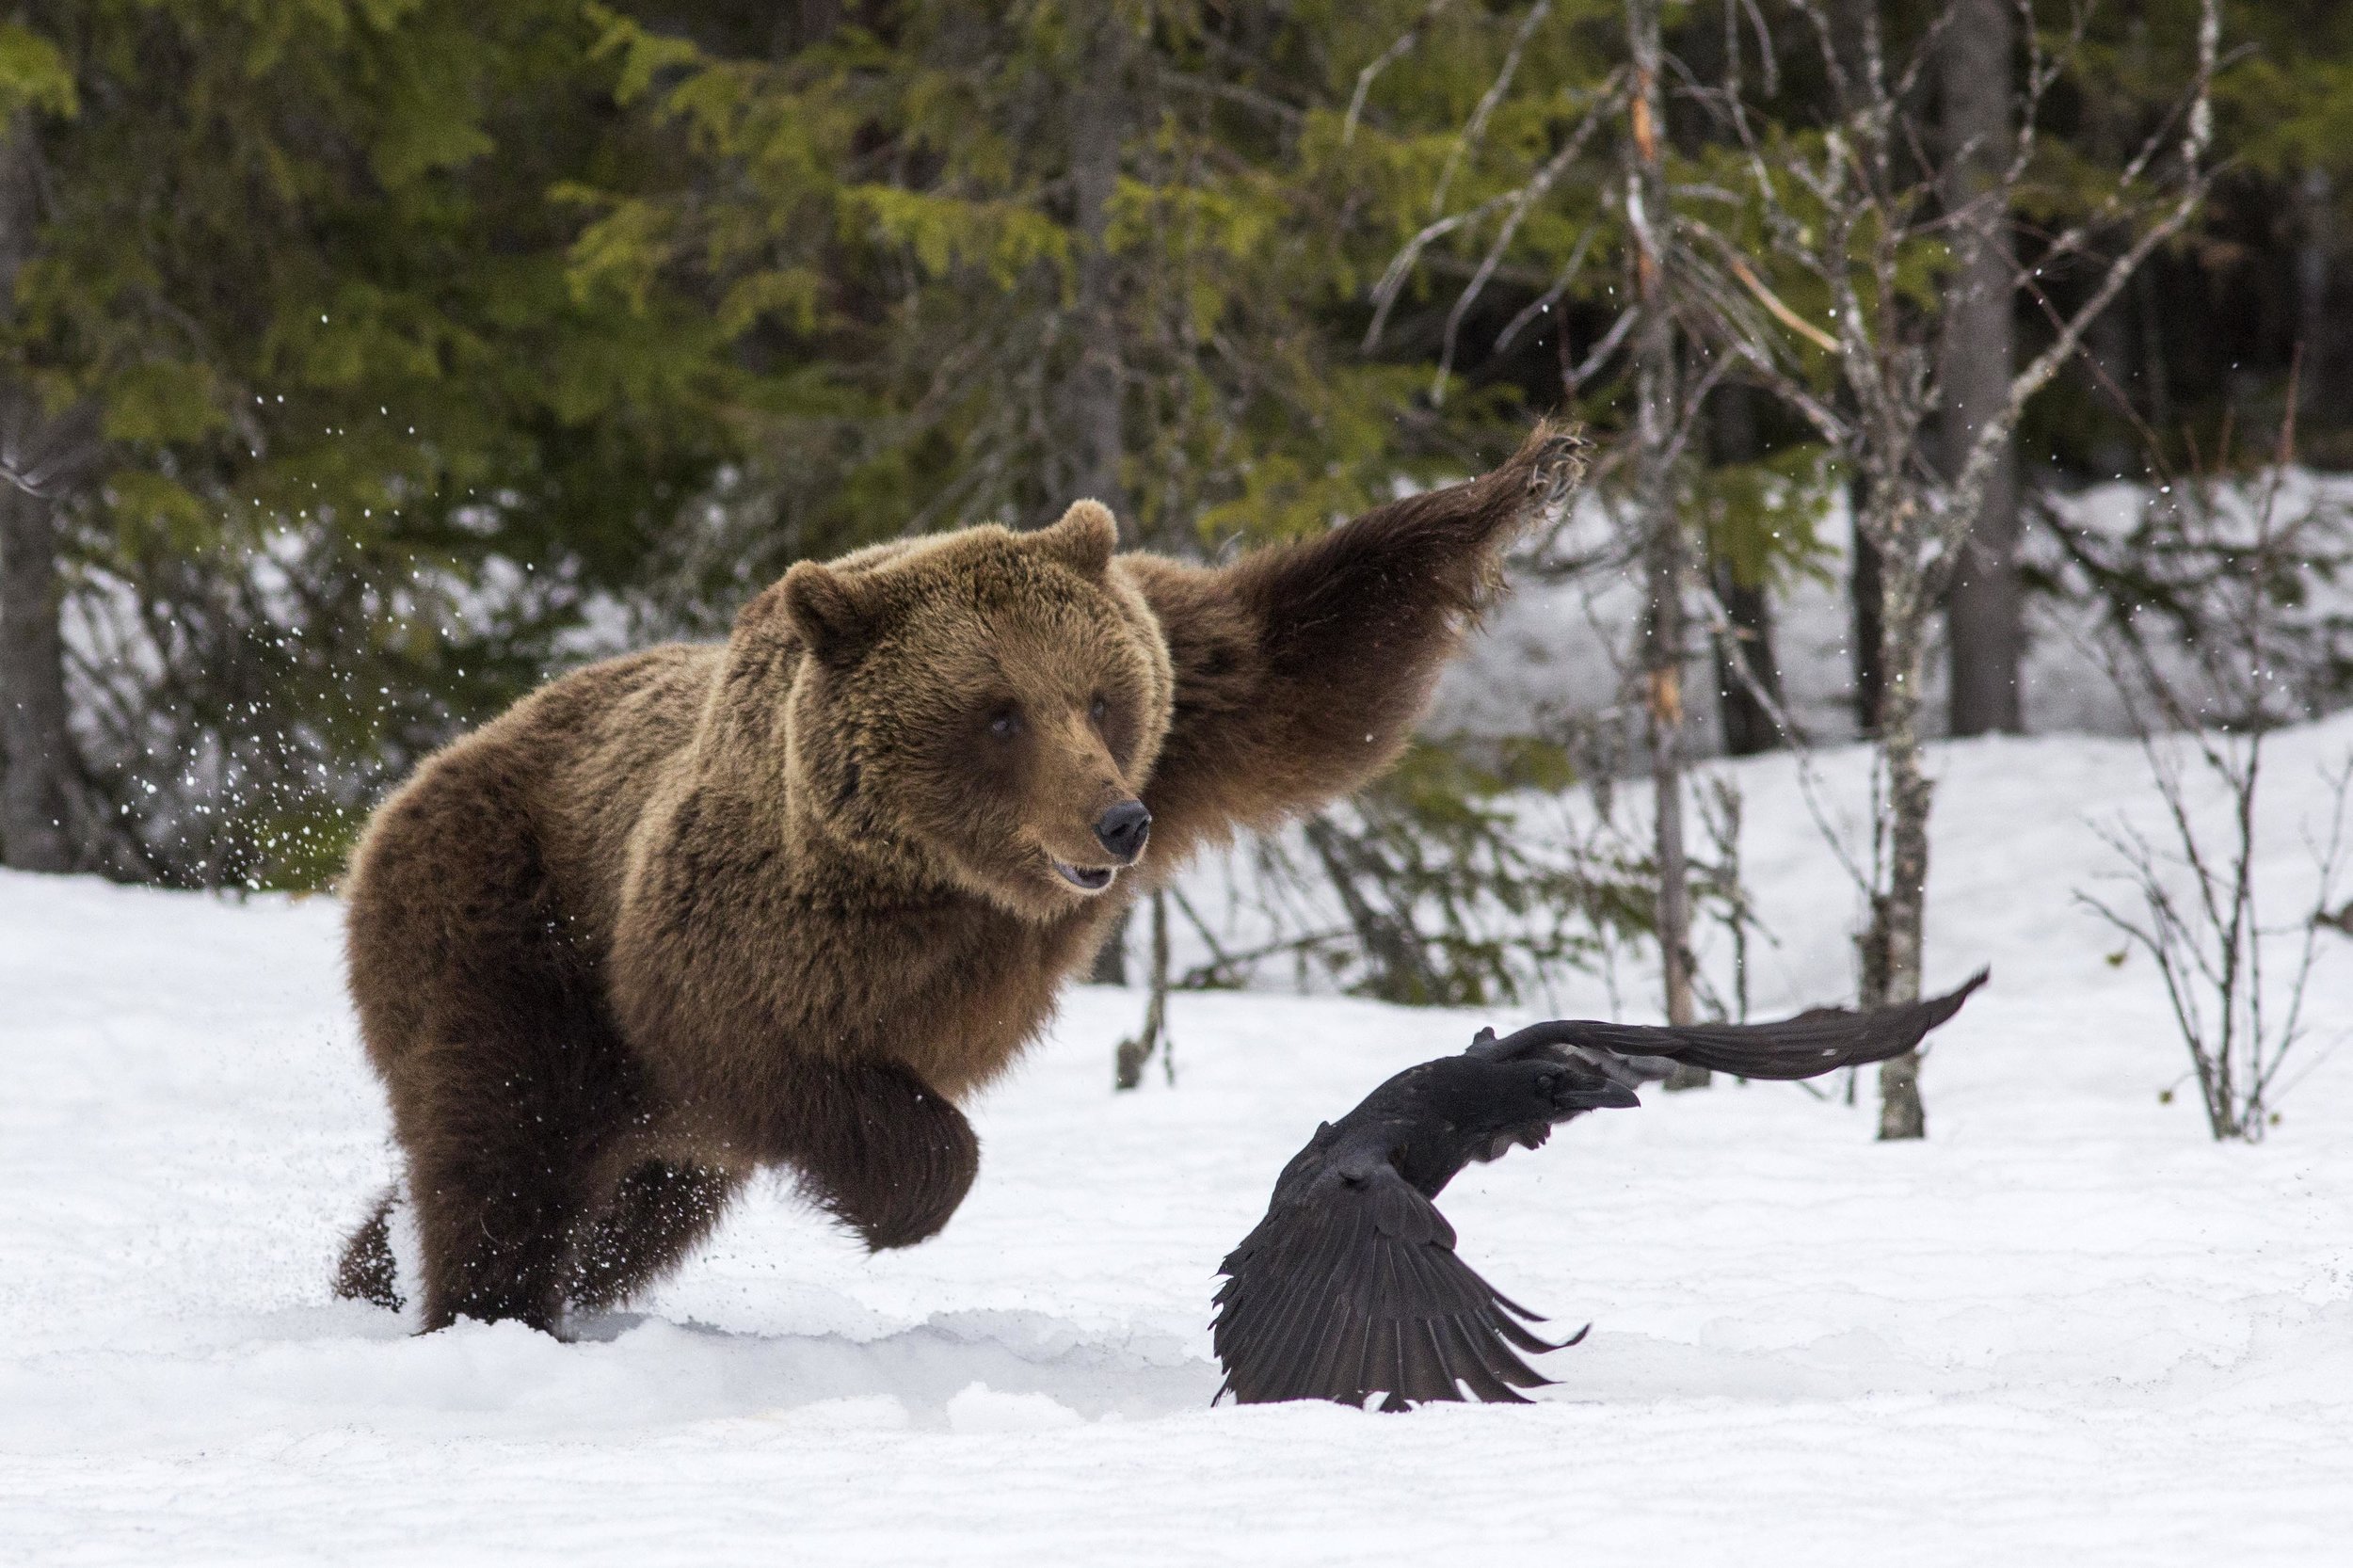 Mikhail Shatenev, Russia, Wildlife Photographer of the Year